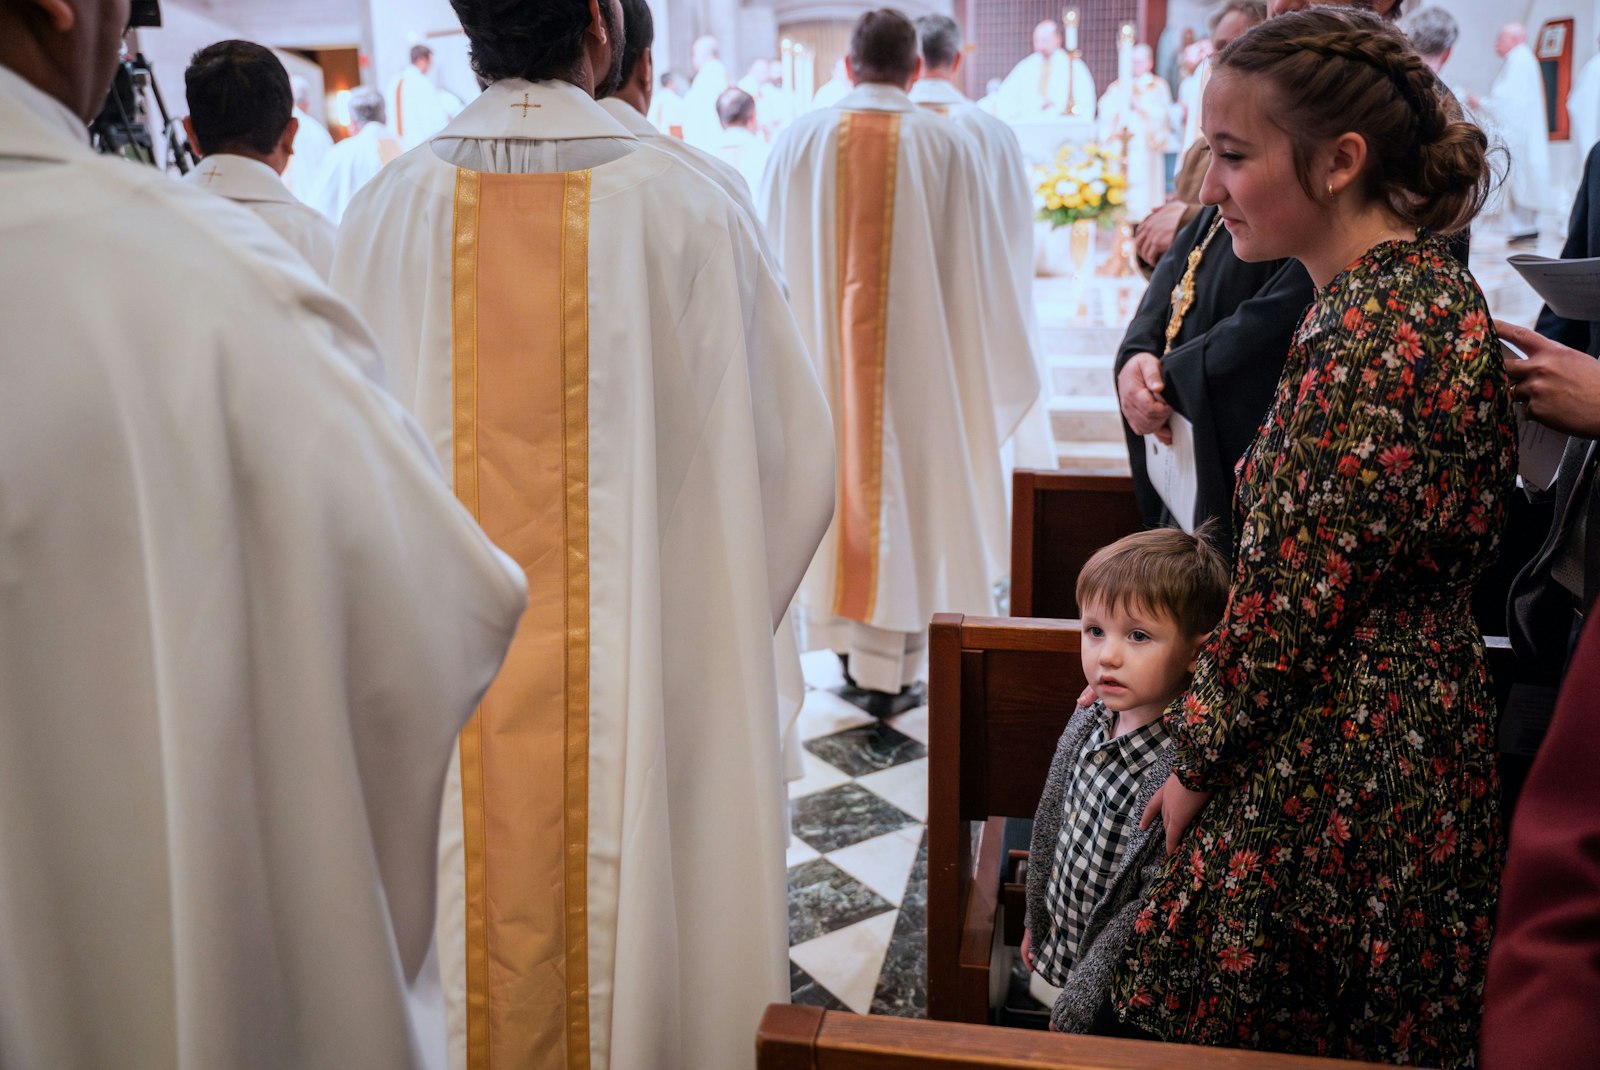 A young boy watches as a line of dozens of priests, bishops and deacons processes into the Cathedral of the Most Blessed Sacrament for Bishop Monforton's inauguration liturgy.